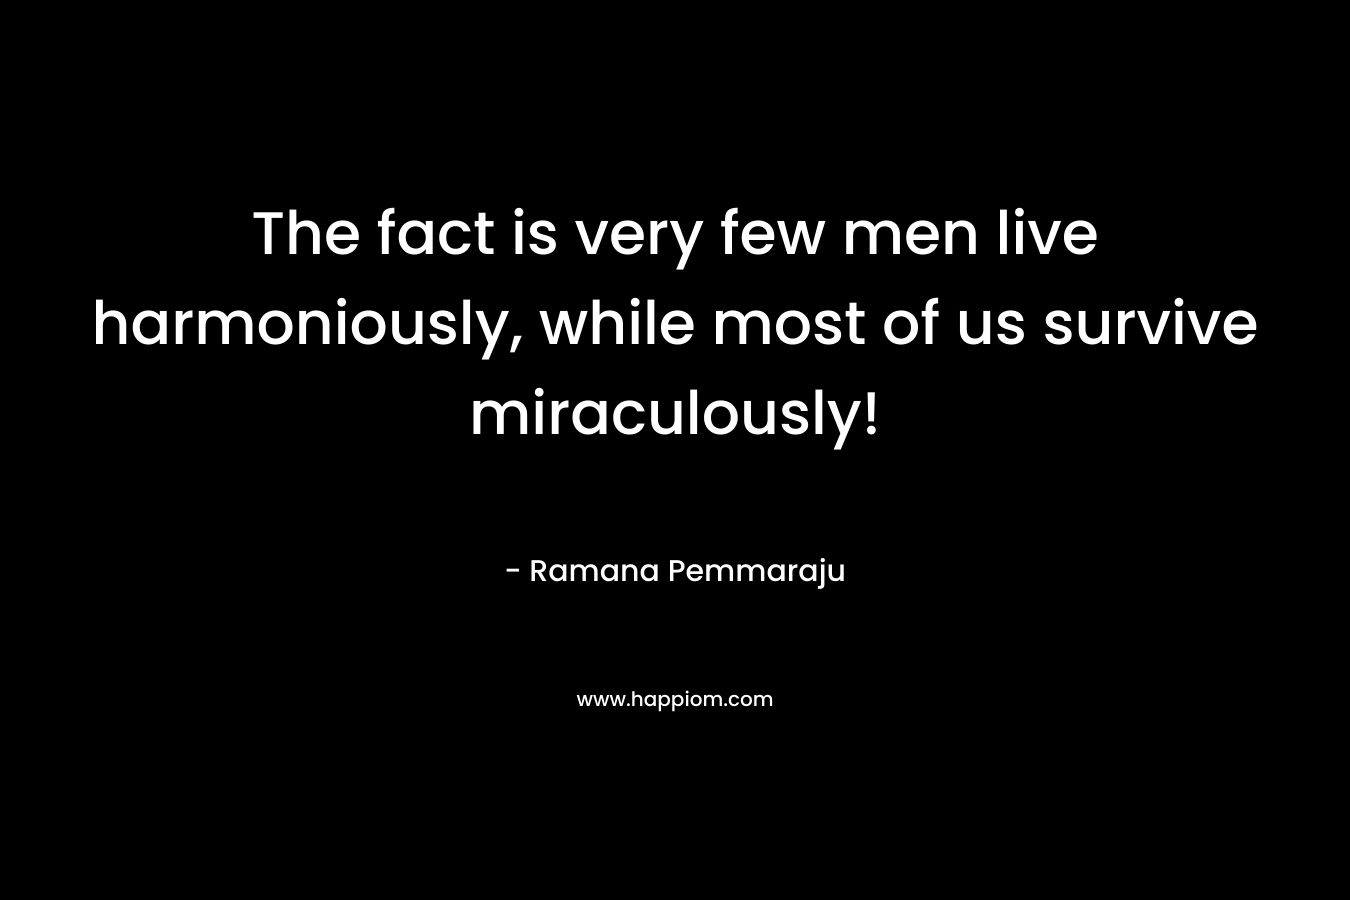 The fact is very few men live harmoniously, while most of us survive miraculously!